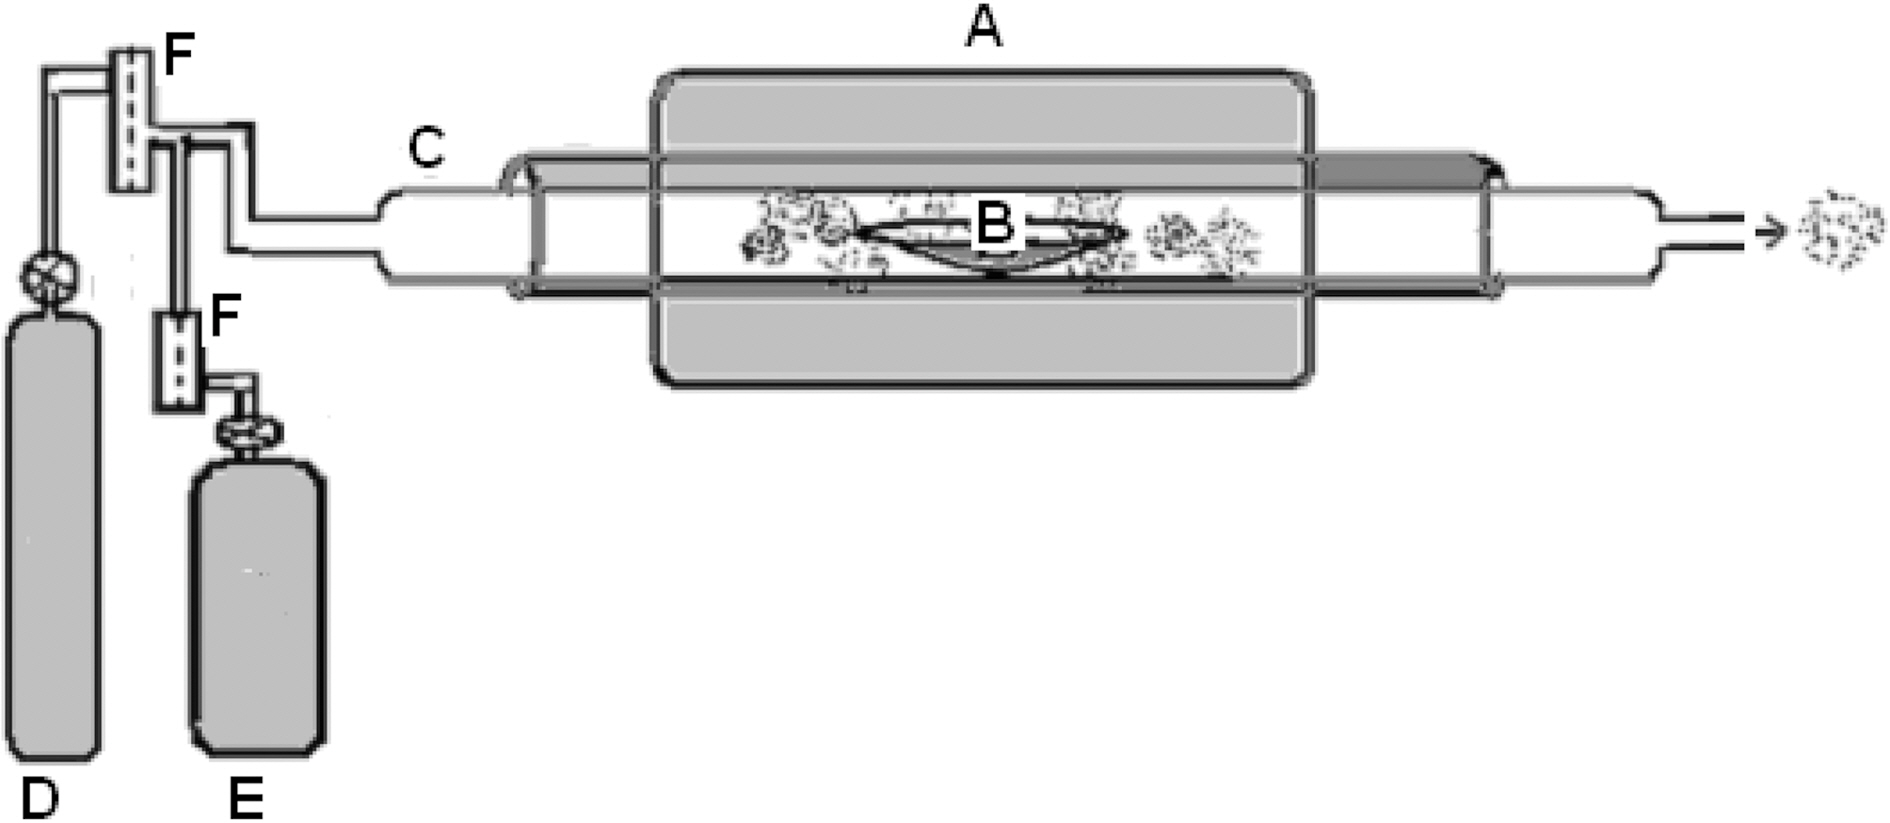 Schematic diagram of pyrolysing. (A) is a single zonefurnace (B) quartz boat for keeping the semu cotton fiber (C)quartz tube inserted into the furnace (D) the carrier gas (E)hydrogen gas or CO2 gas cylinder and (F) flow meter.